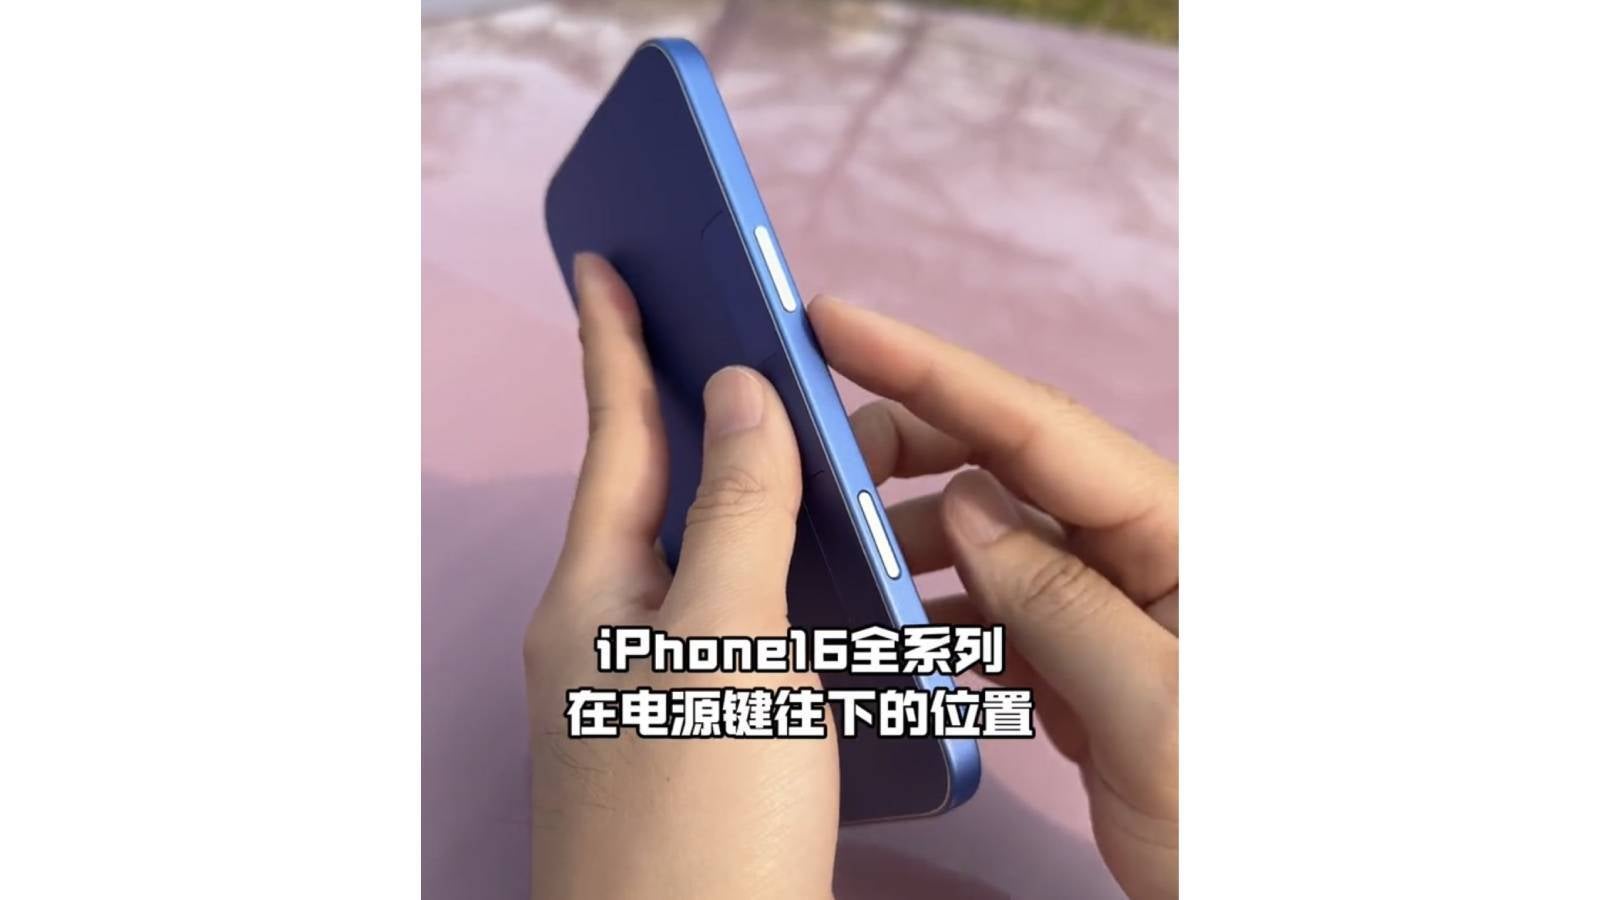 The entire iPhone 16 range will have a new Capture button - Few surprises left on the iPhone 16 as images of dummy units, cases and new color variants leaked